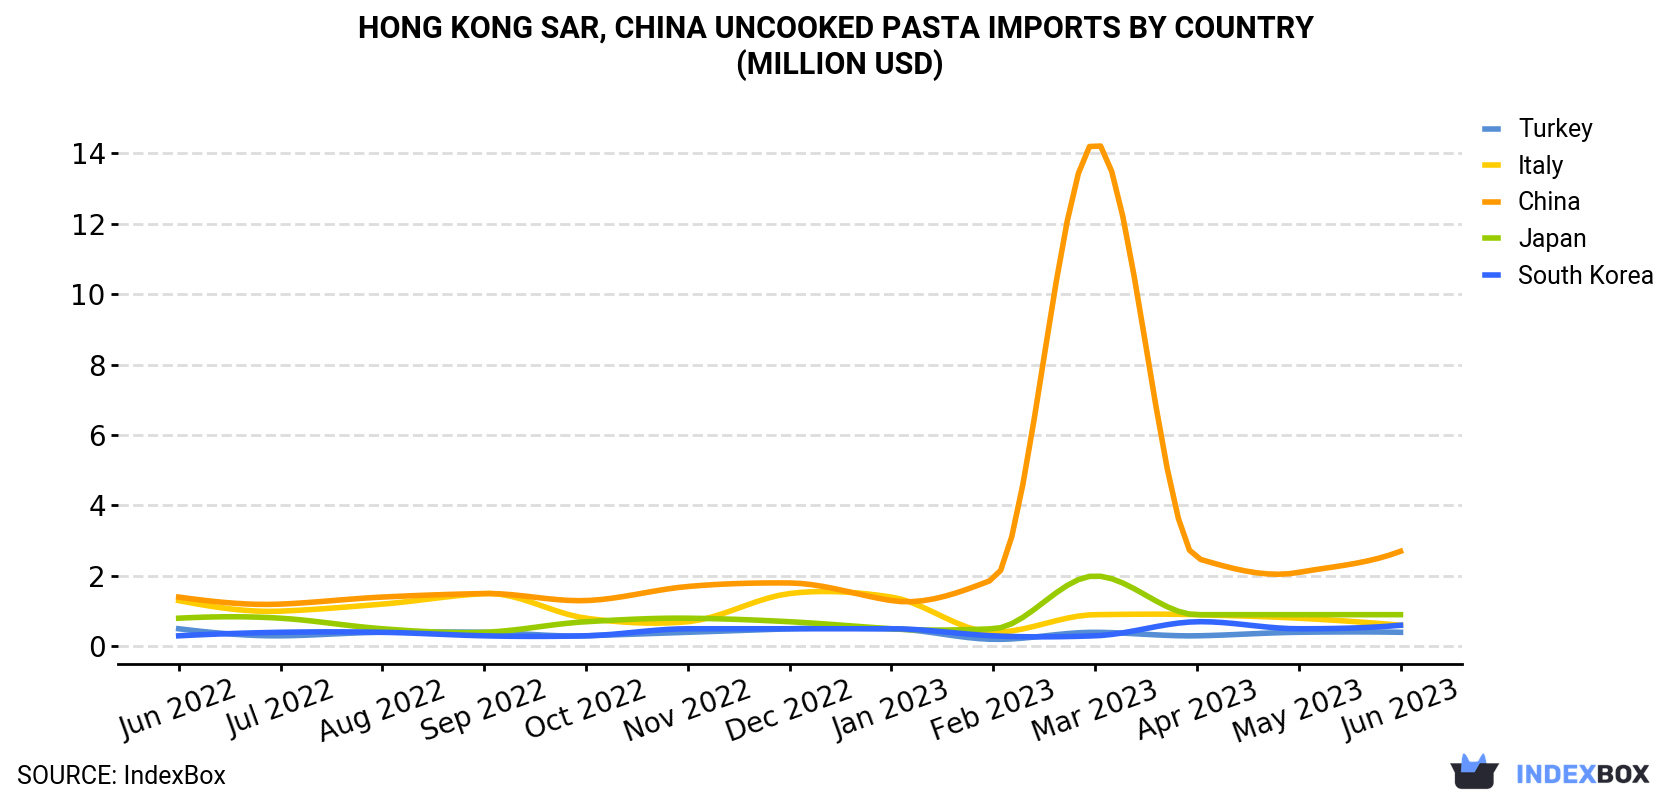 Hong Kong Uncooked Pasta Imports By Country (Million USD)